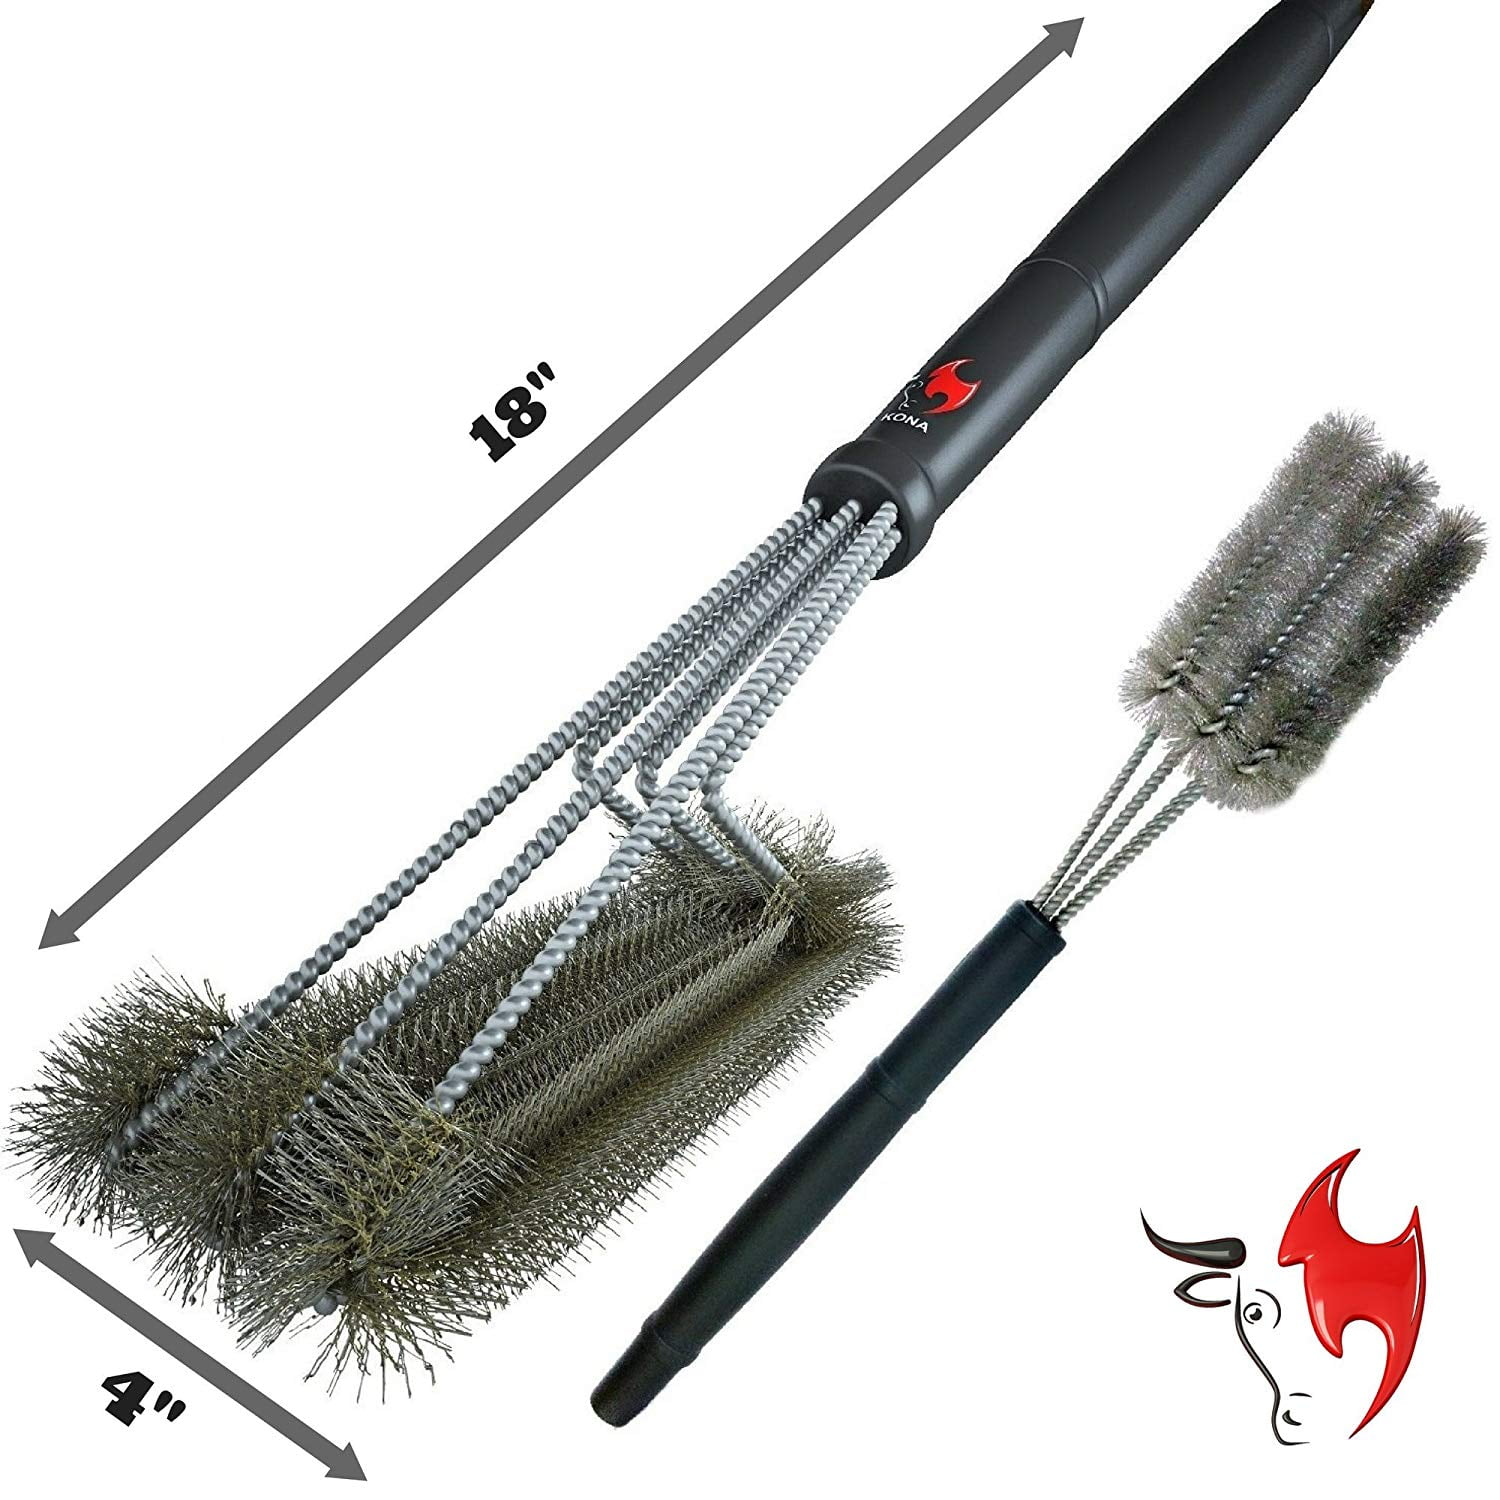 Ceekan Grill Brush for Outdoor Grill, BBQ Brush for Grill Cleaning, 18  Grill Cleaner Brush and Scraper, Smoker Grill Accessories Tool - Christmas